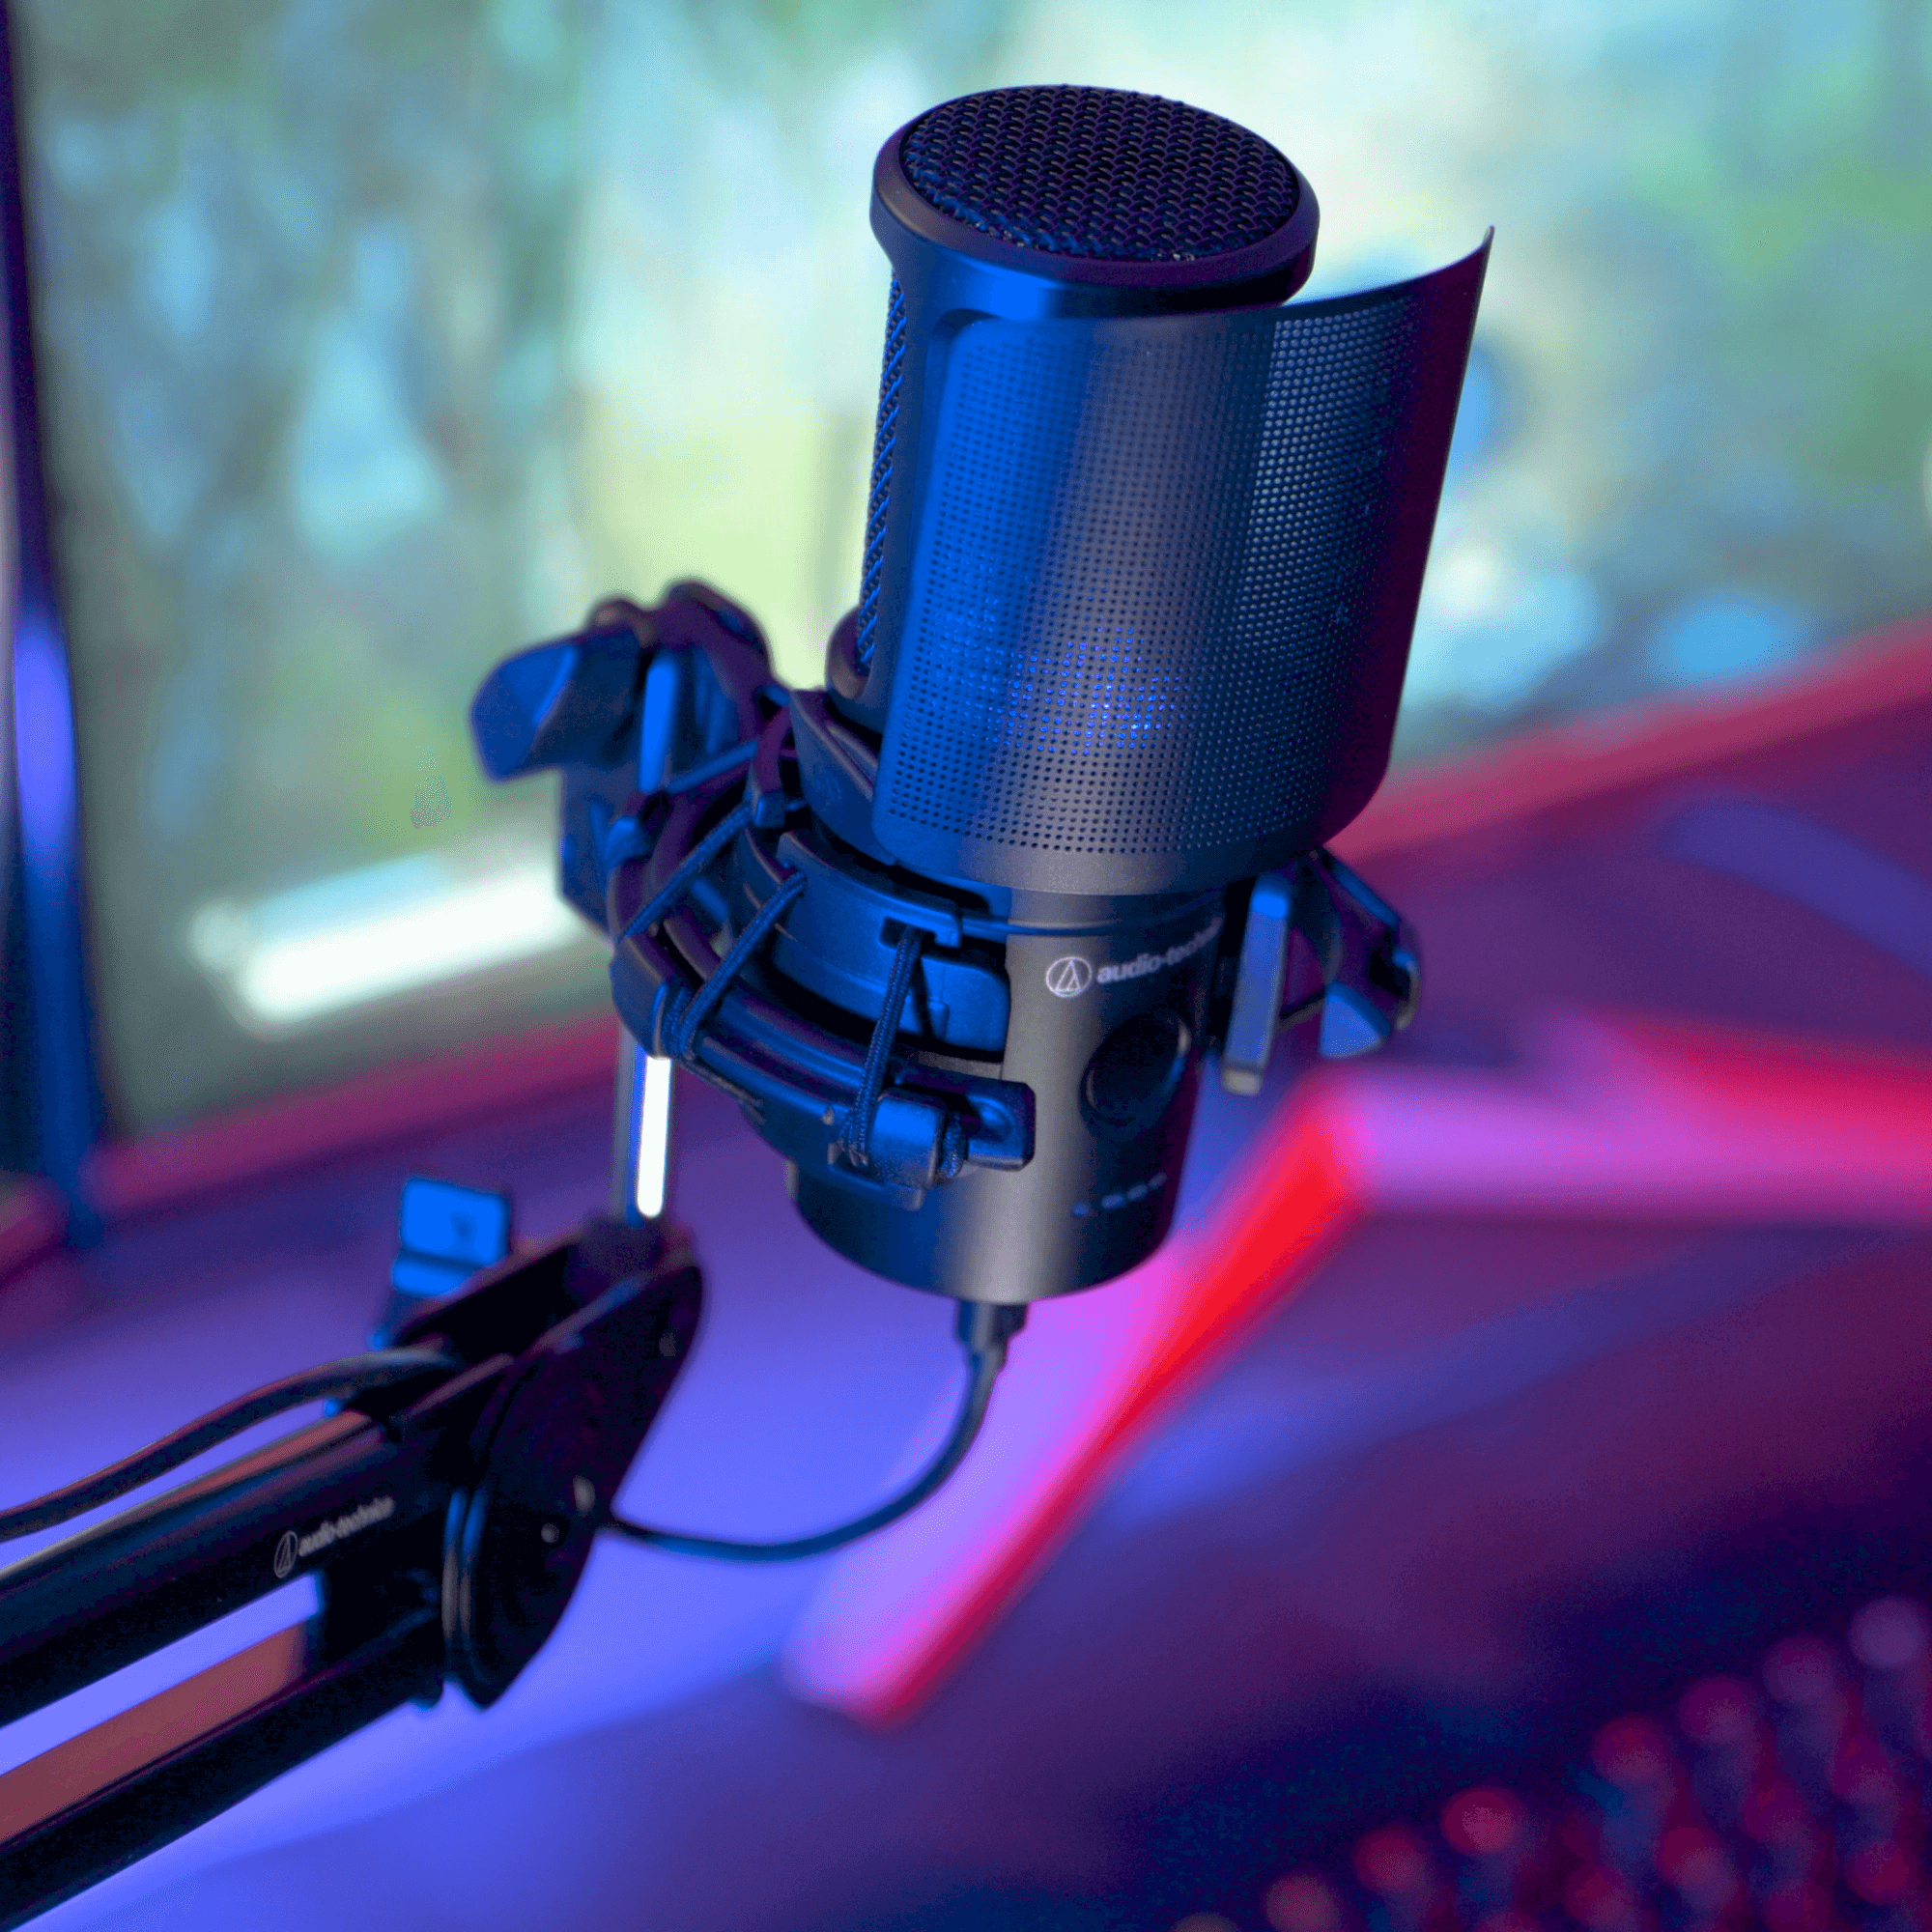 Audio-Technica AT2020USB-XP Microphone Review: A Creator's Dream Tool